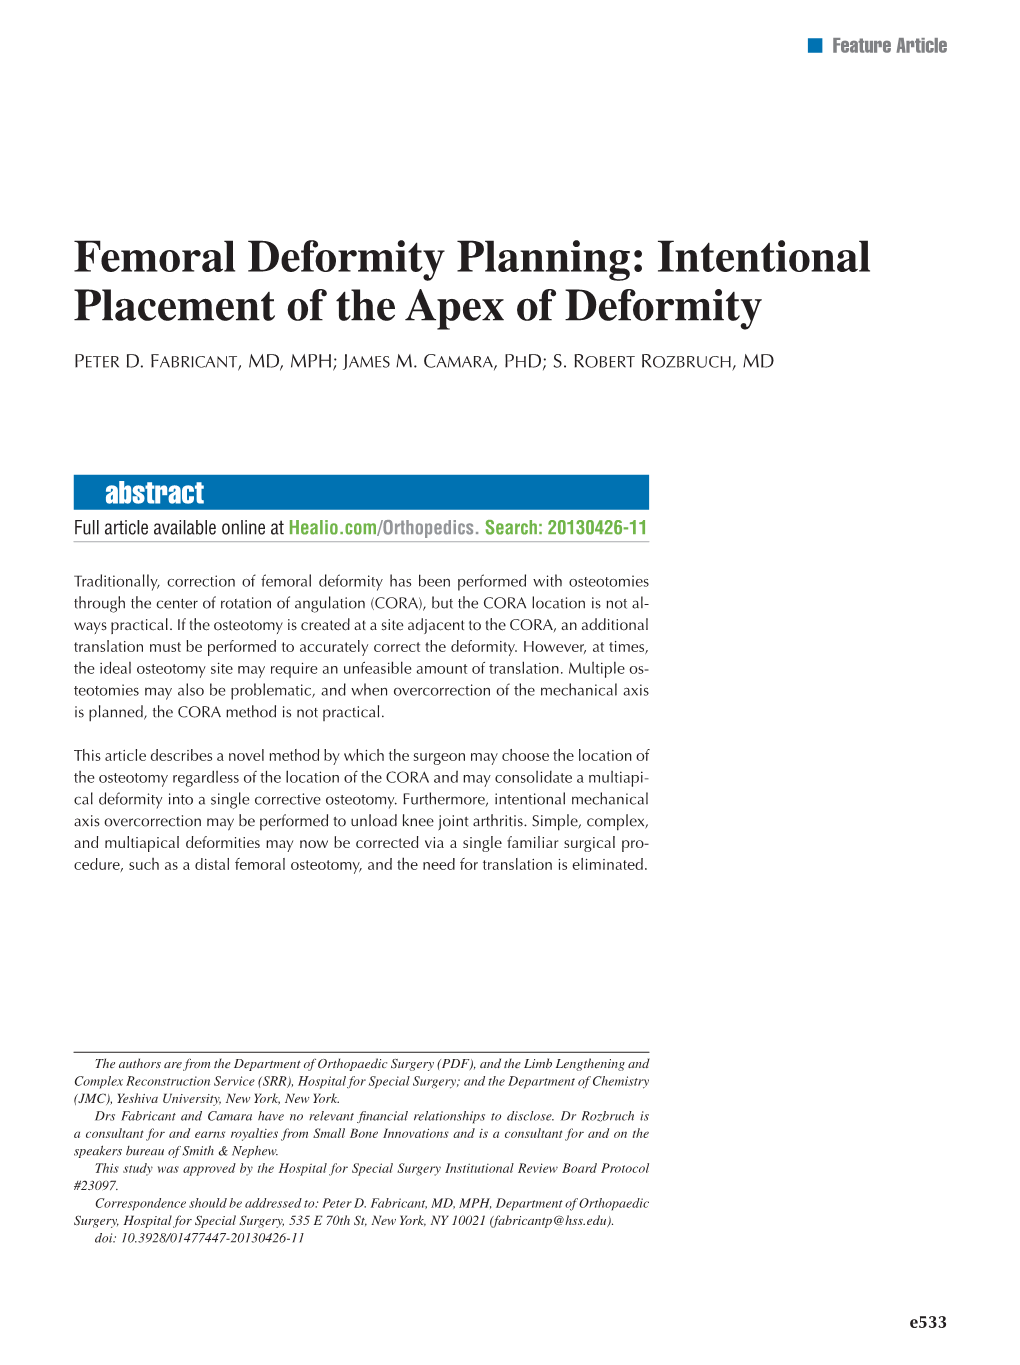 Femoral Deformity Planning: Intentional Placement of the Apex of Deformity